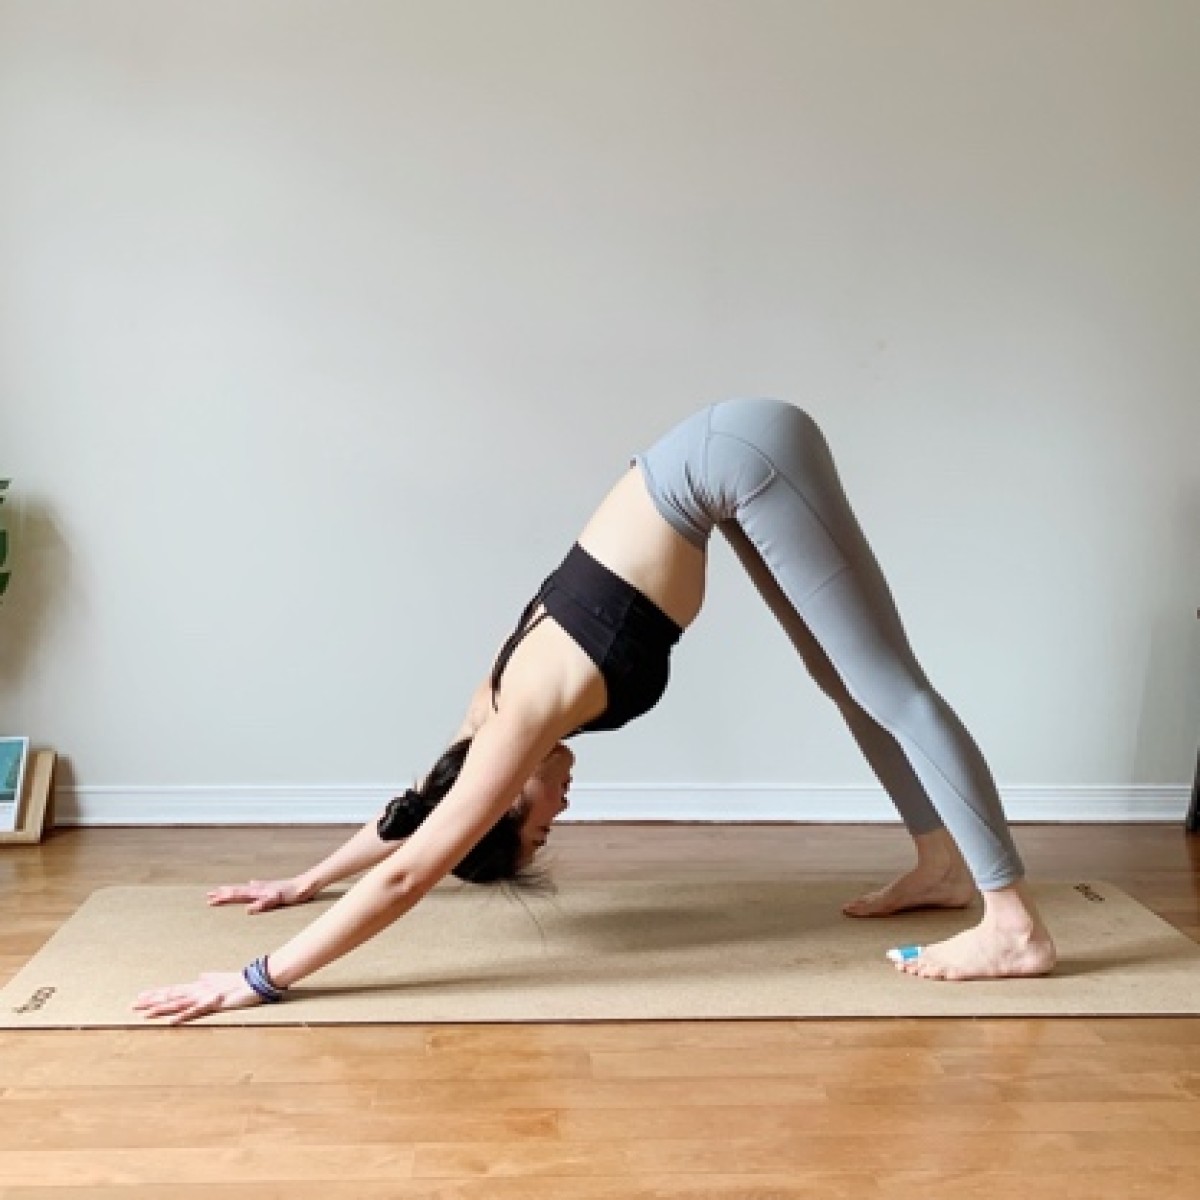 A person doing yoga  Description automatically generated with medium confidence